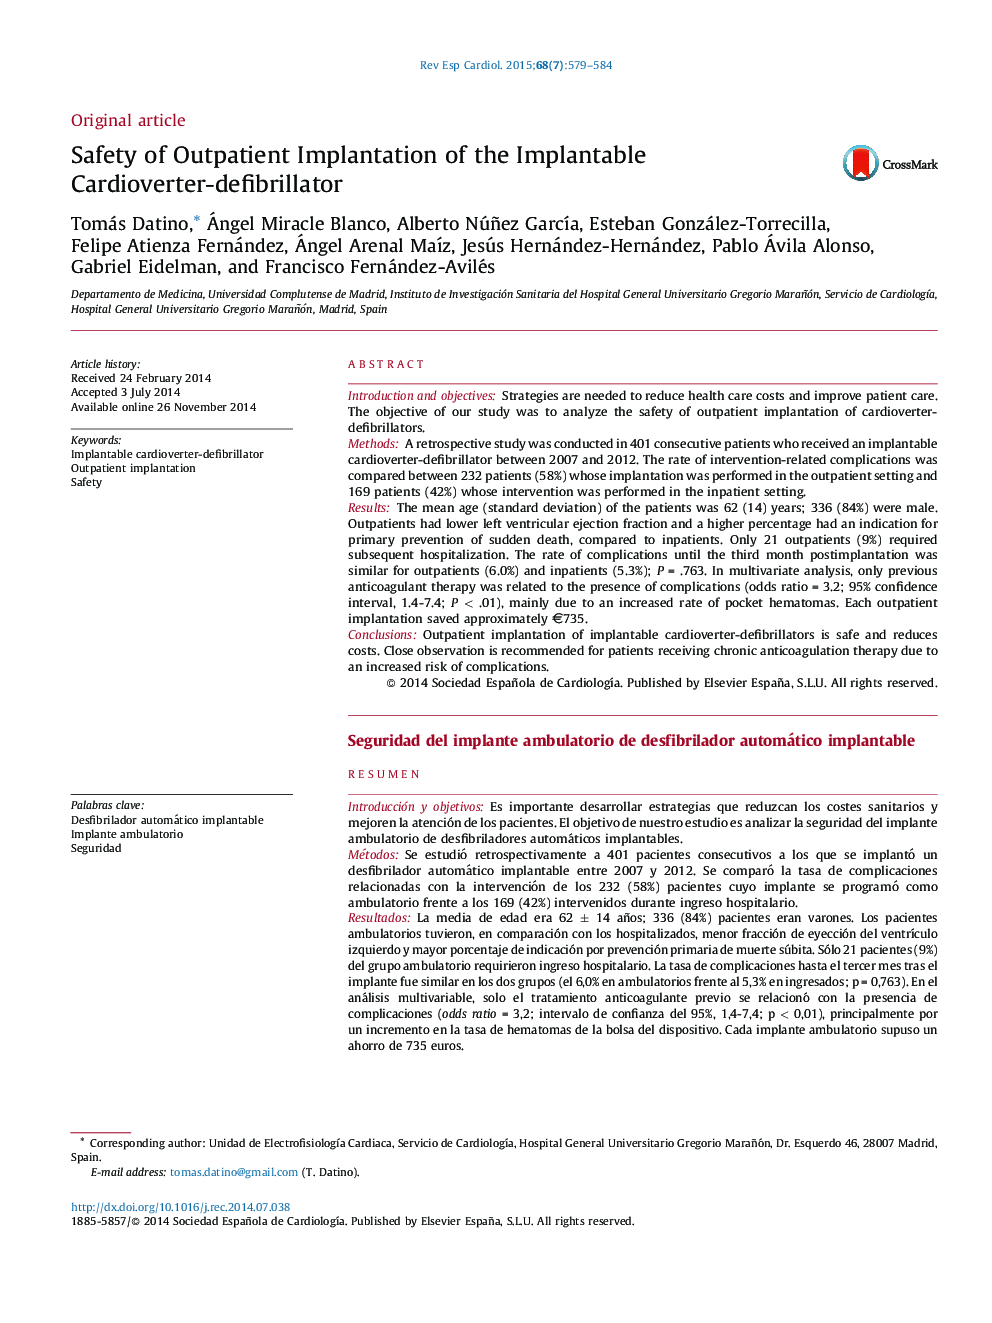 Safety of Outpatient Implantation of the Implantable Cardioverter-defibrillator